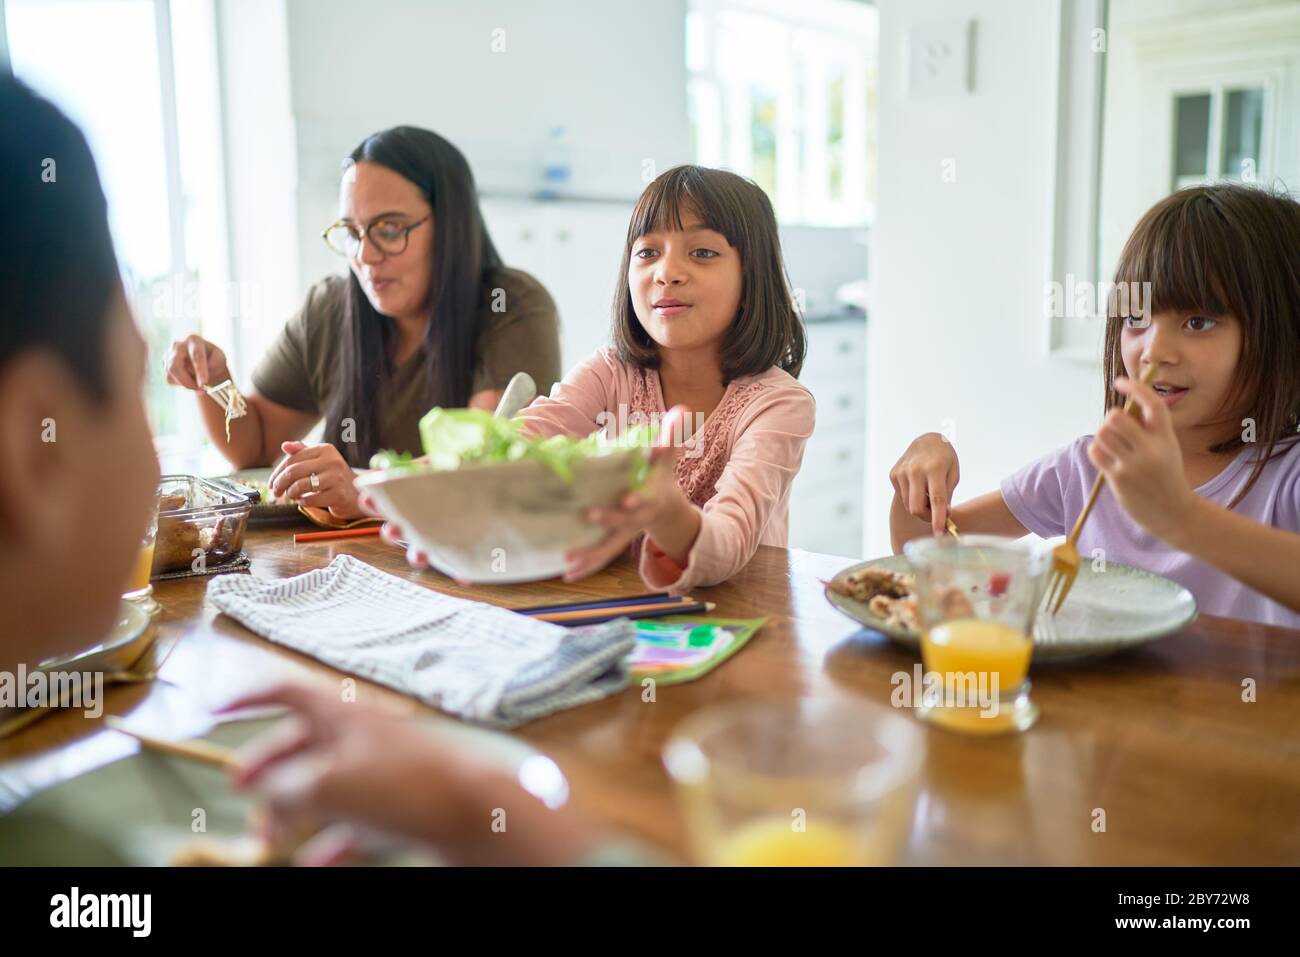 Family eating lunch at dining table Stock Photo